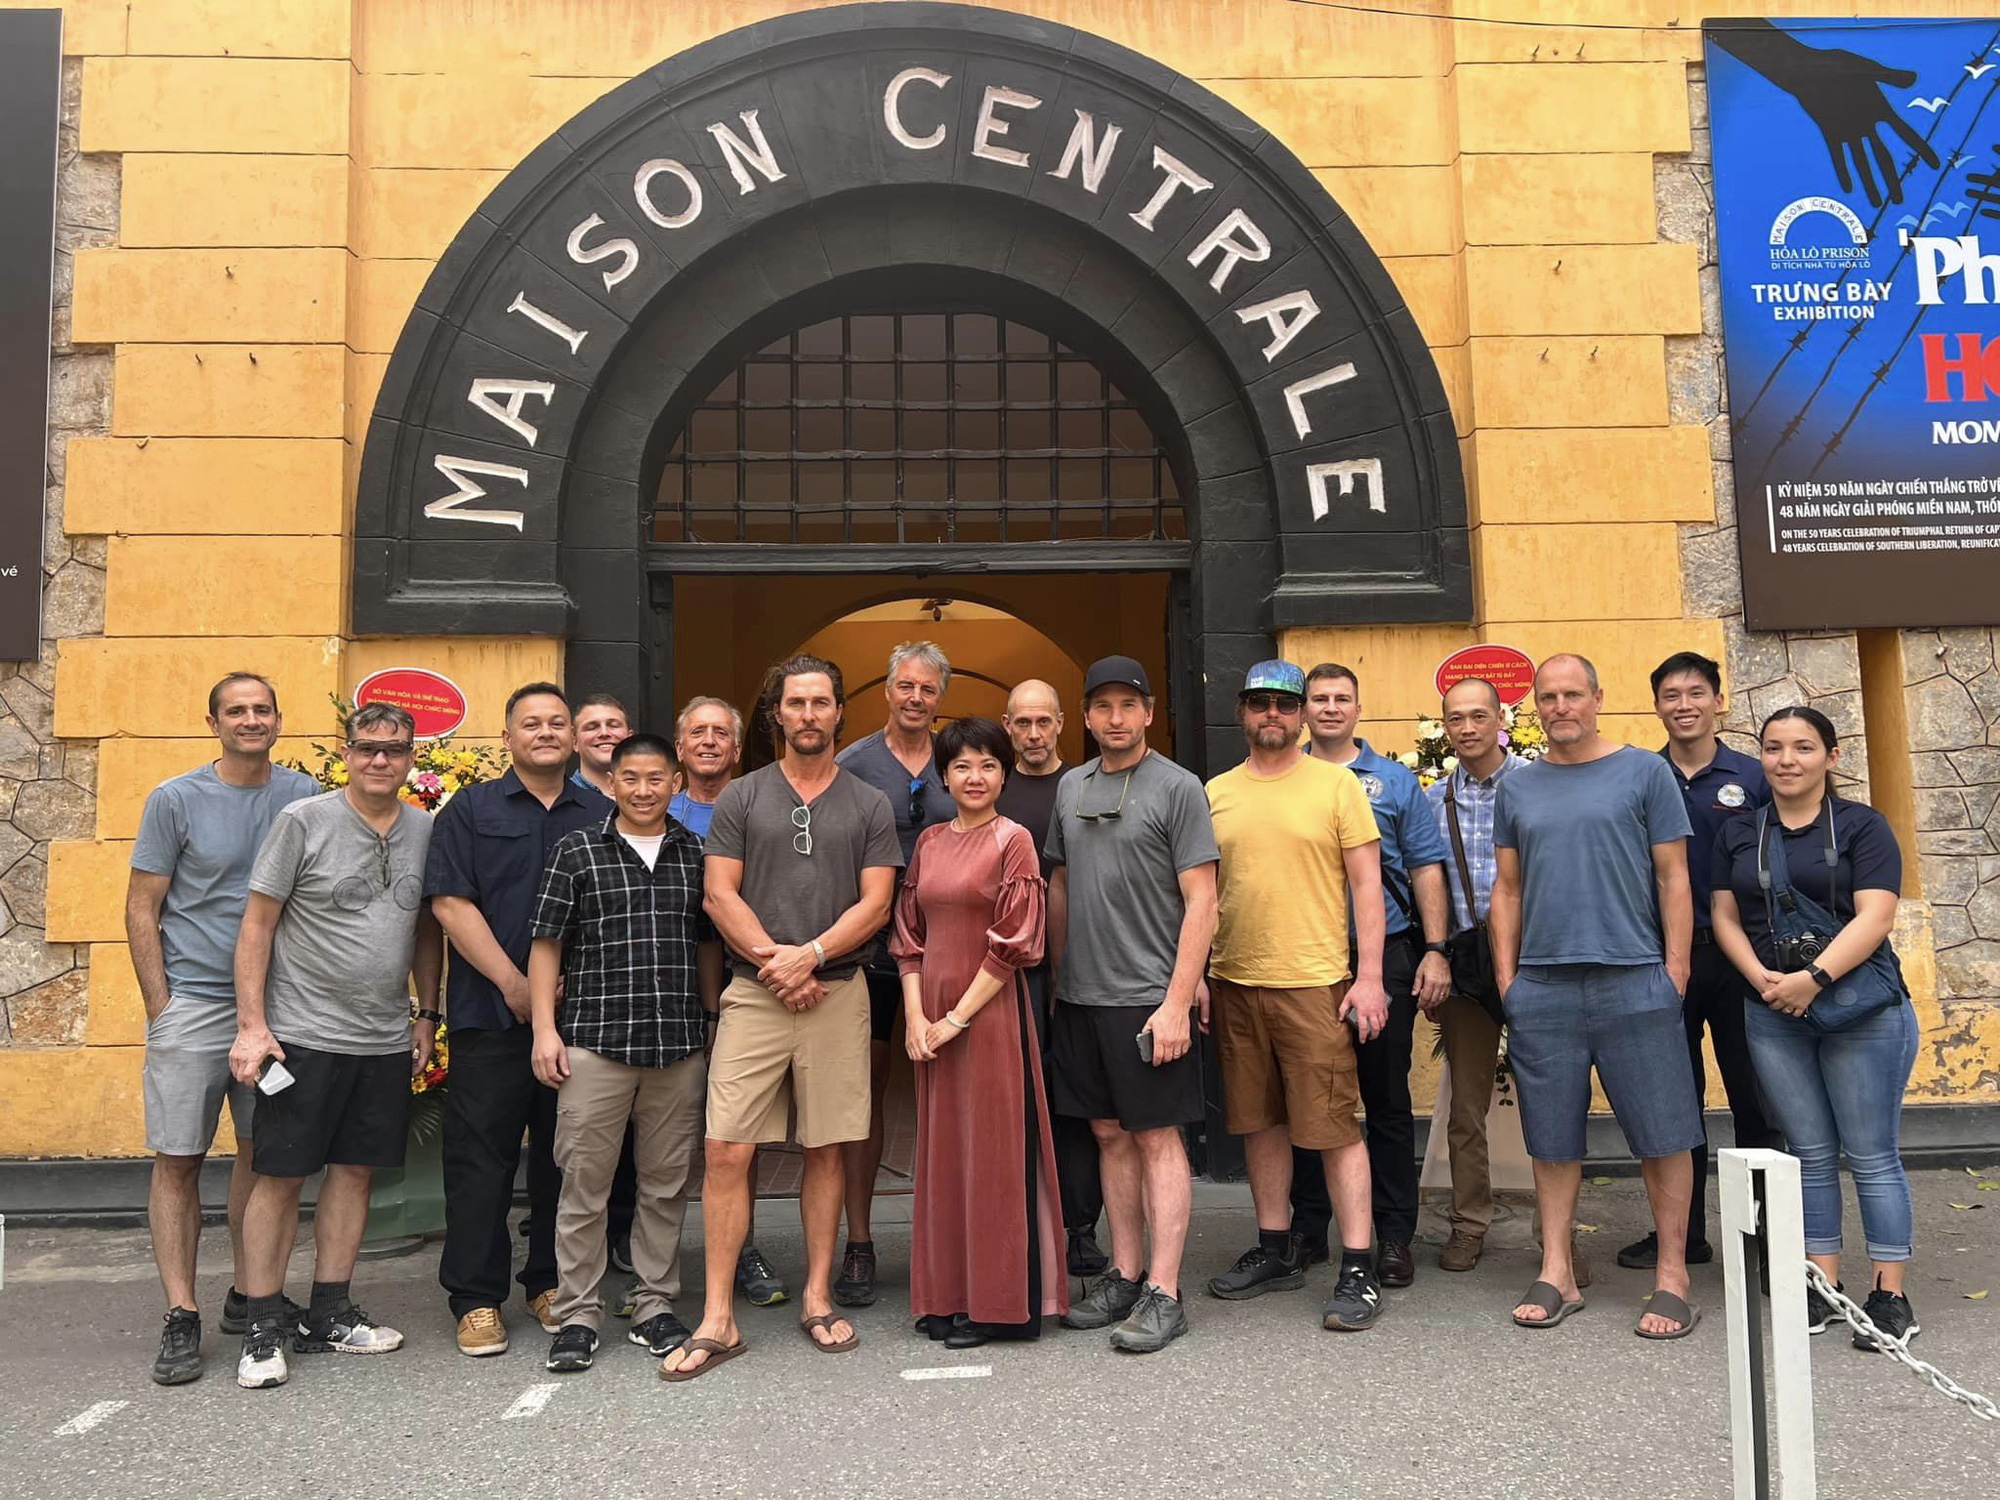 An American delegation led by U.S. representative Dean Phillips (who wears a black cap) pose for a photo at Hoa Lo Prison Relic in Hanoi, March 10, 2023. Photo: Hoa Lo Prison Relic